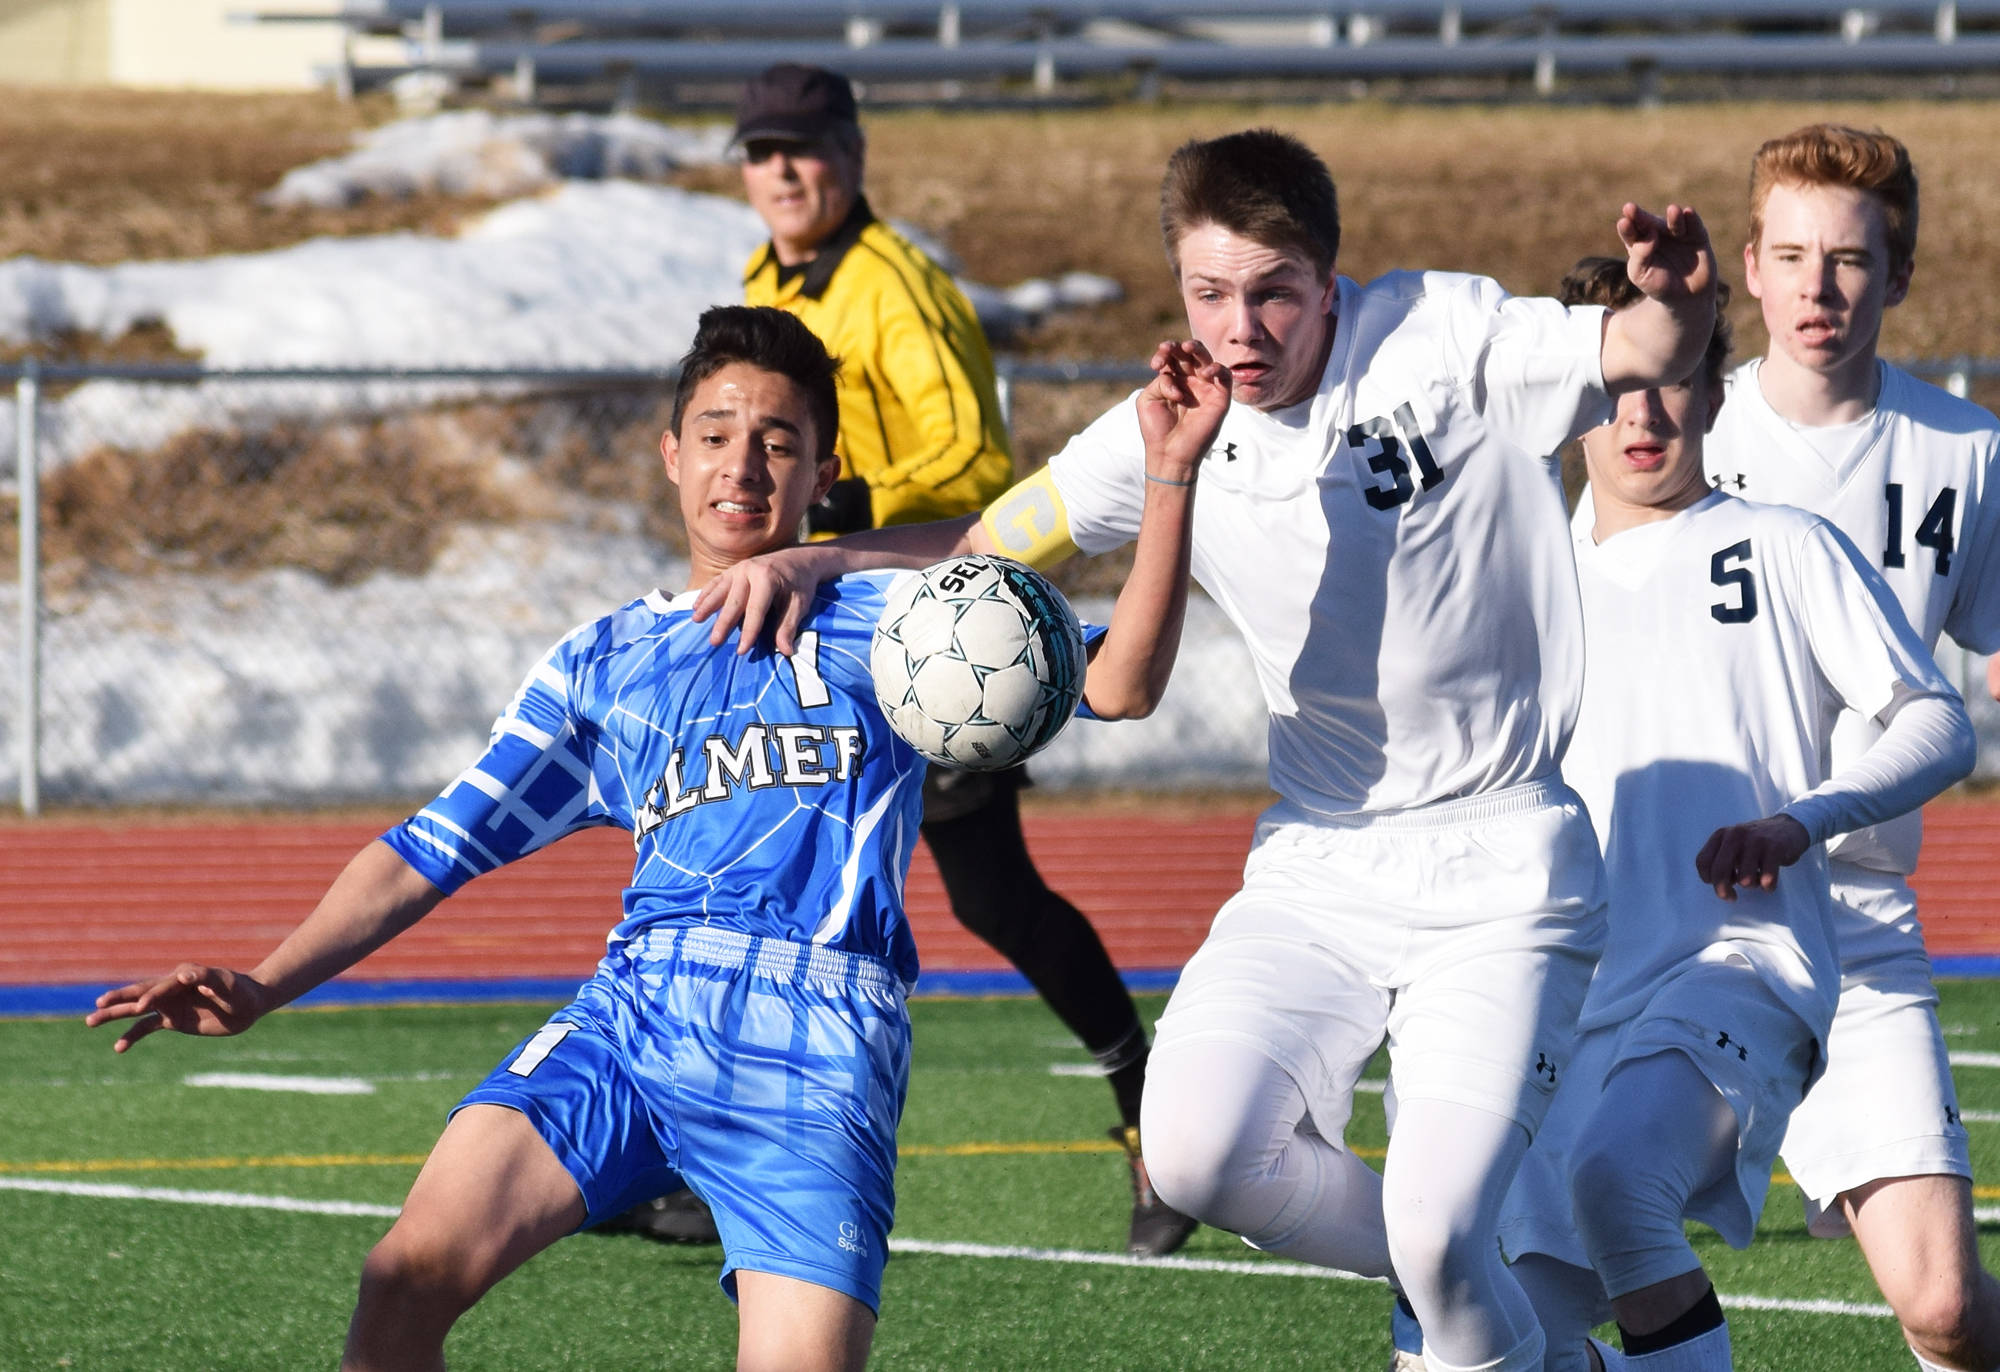 Soldotna junior Eli Sheridan (31) fights for the ball in the Palmer goalie box against Palmer’s Isaiah Montoya, Friday afternoon at Justin Maile Field in Soldotna. (Photo by Joey Klecka/Peninsula Clarion)